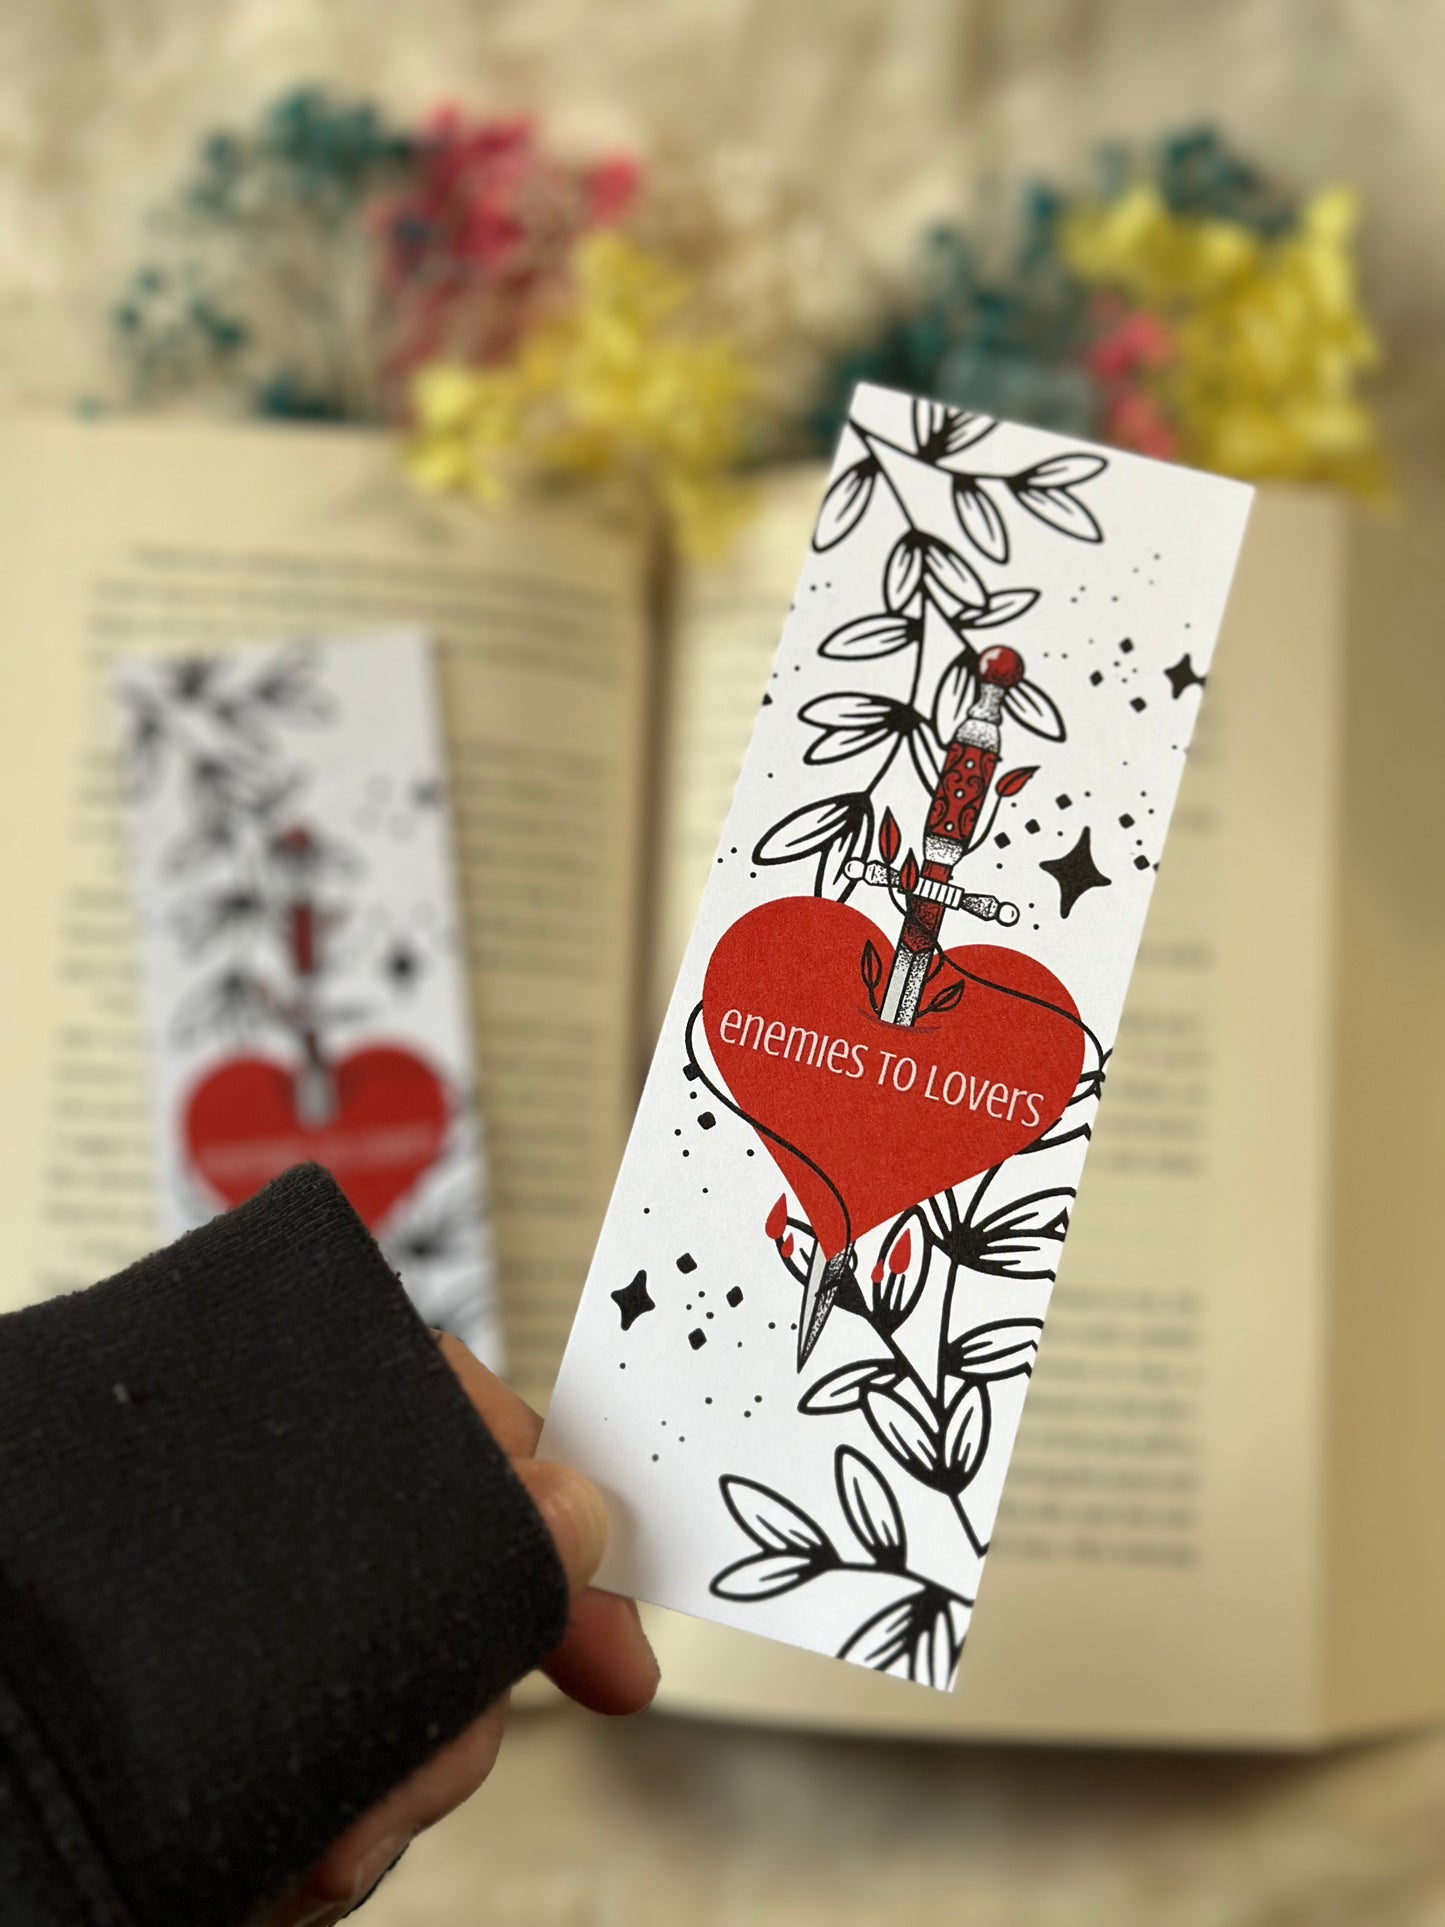 The Enemies To Lovers Bookmarks